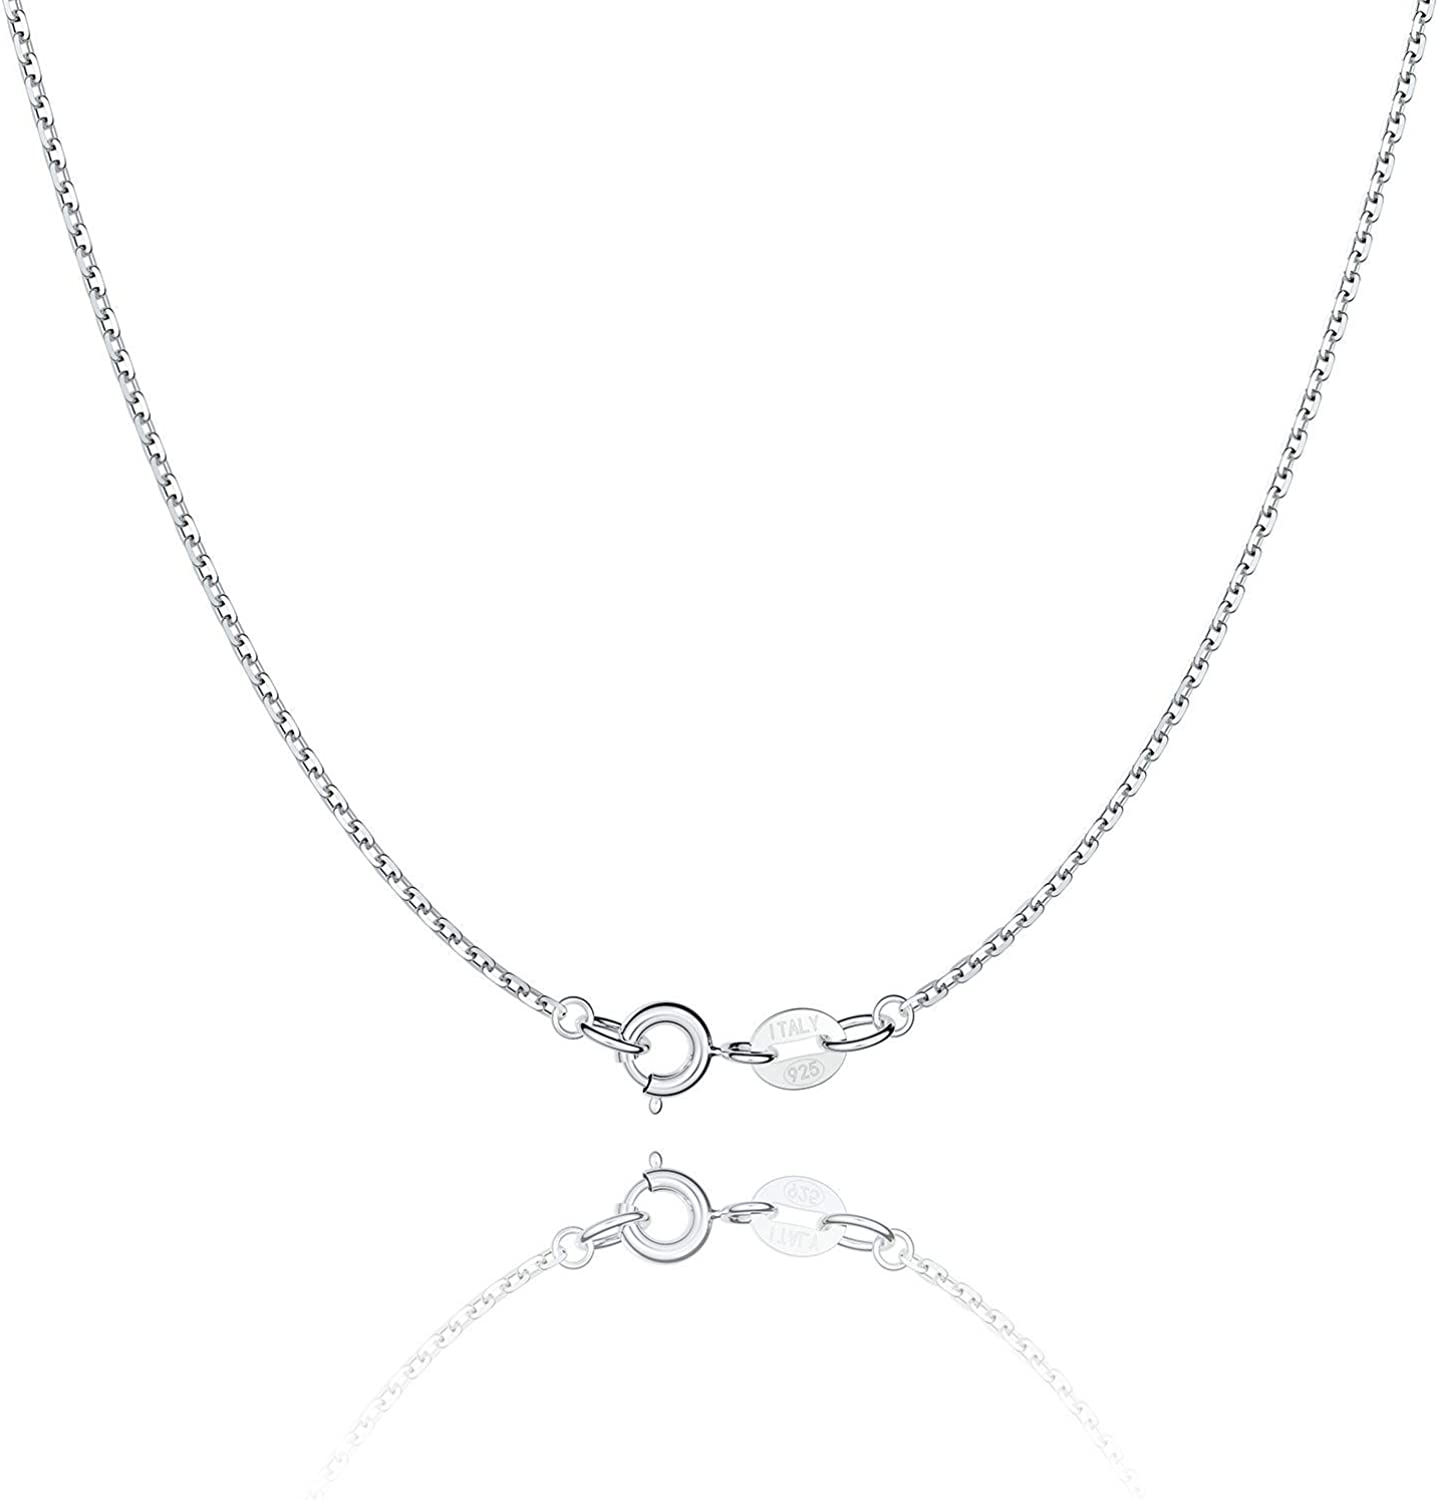 Jewlpire 925 Sterling Silver Chain Necklace Chain for Women Girls 1.1mm Cable Chain Necklace Upgraded Spring-Ring Clasp - Thin & Sturdy - Italian Quality 16/18/20/22/24 Inch